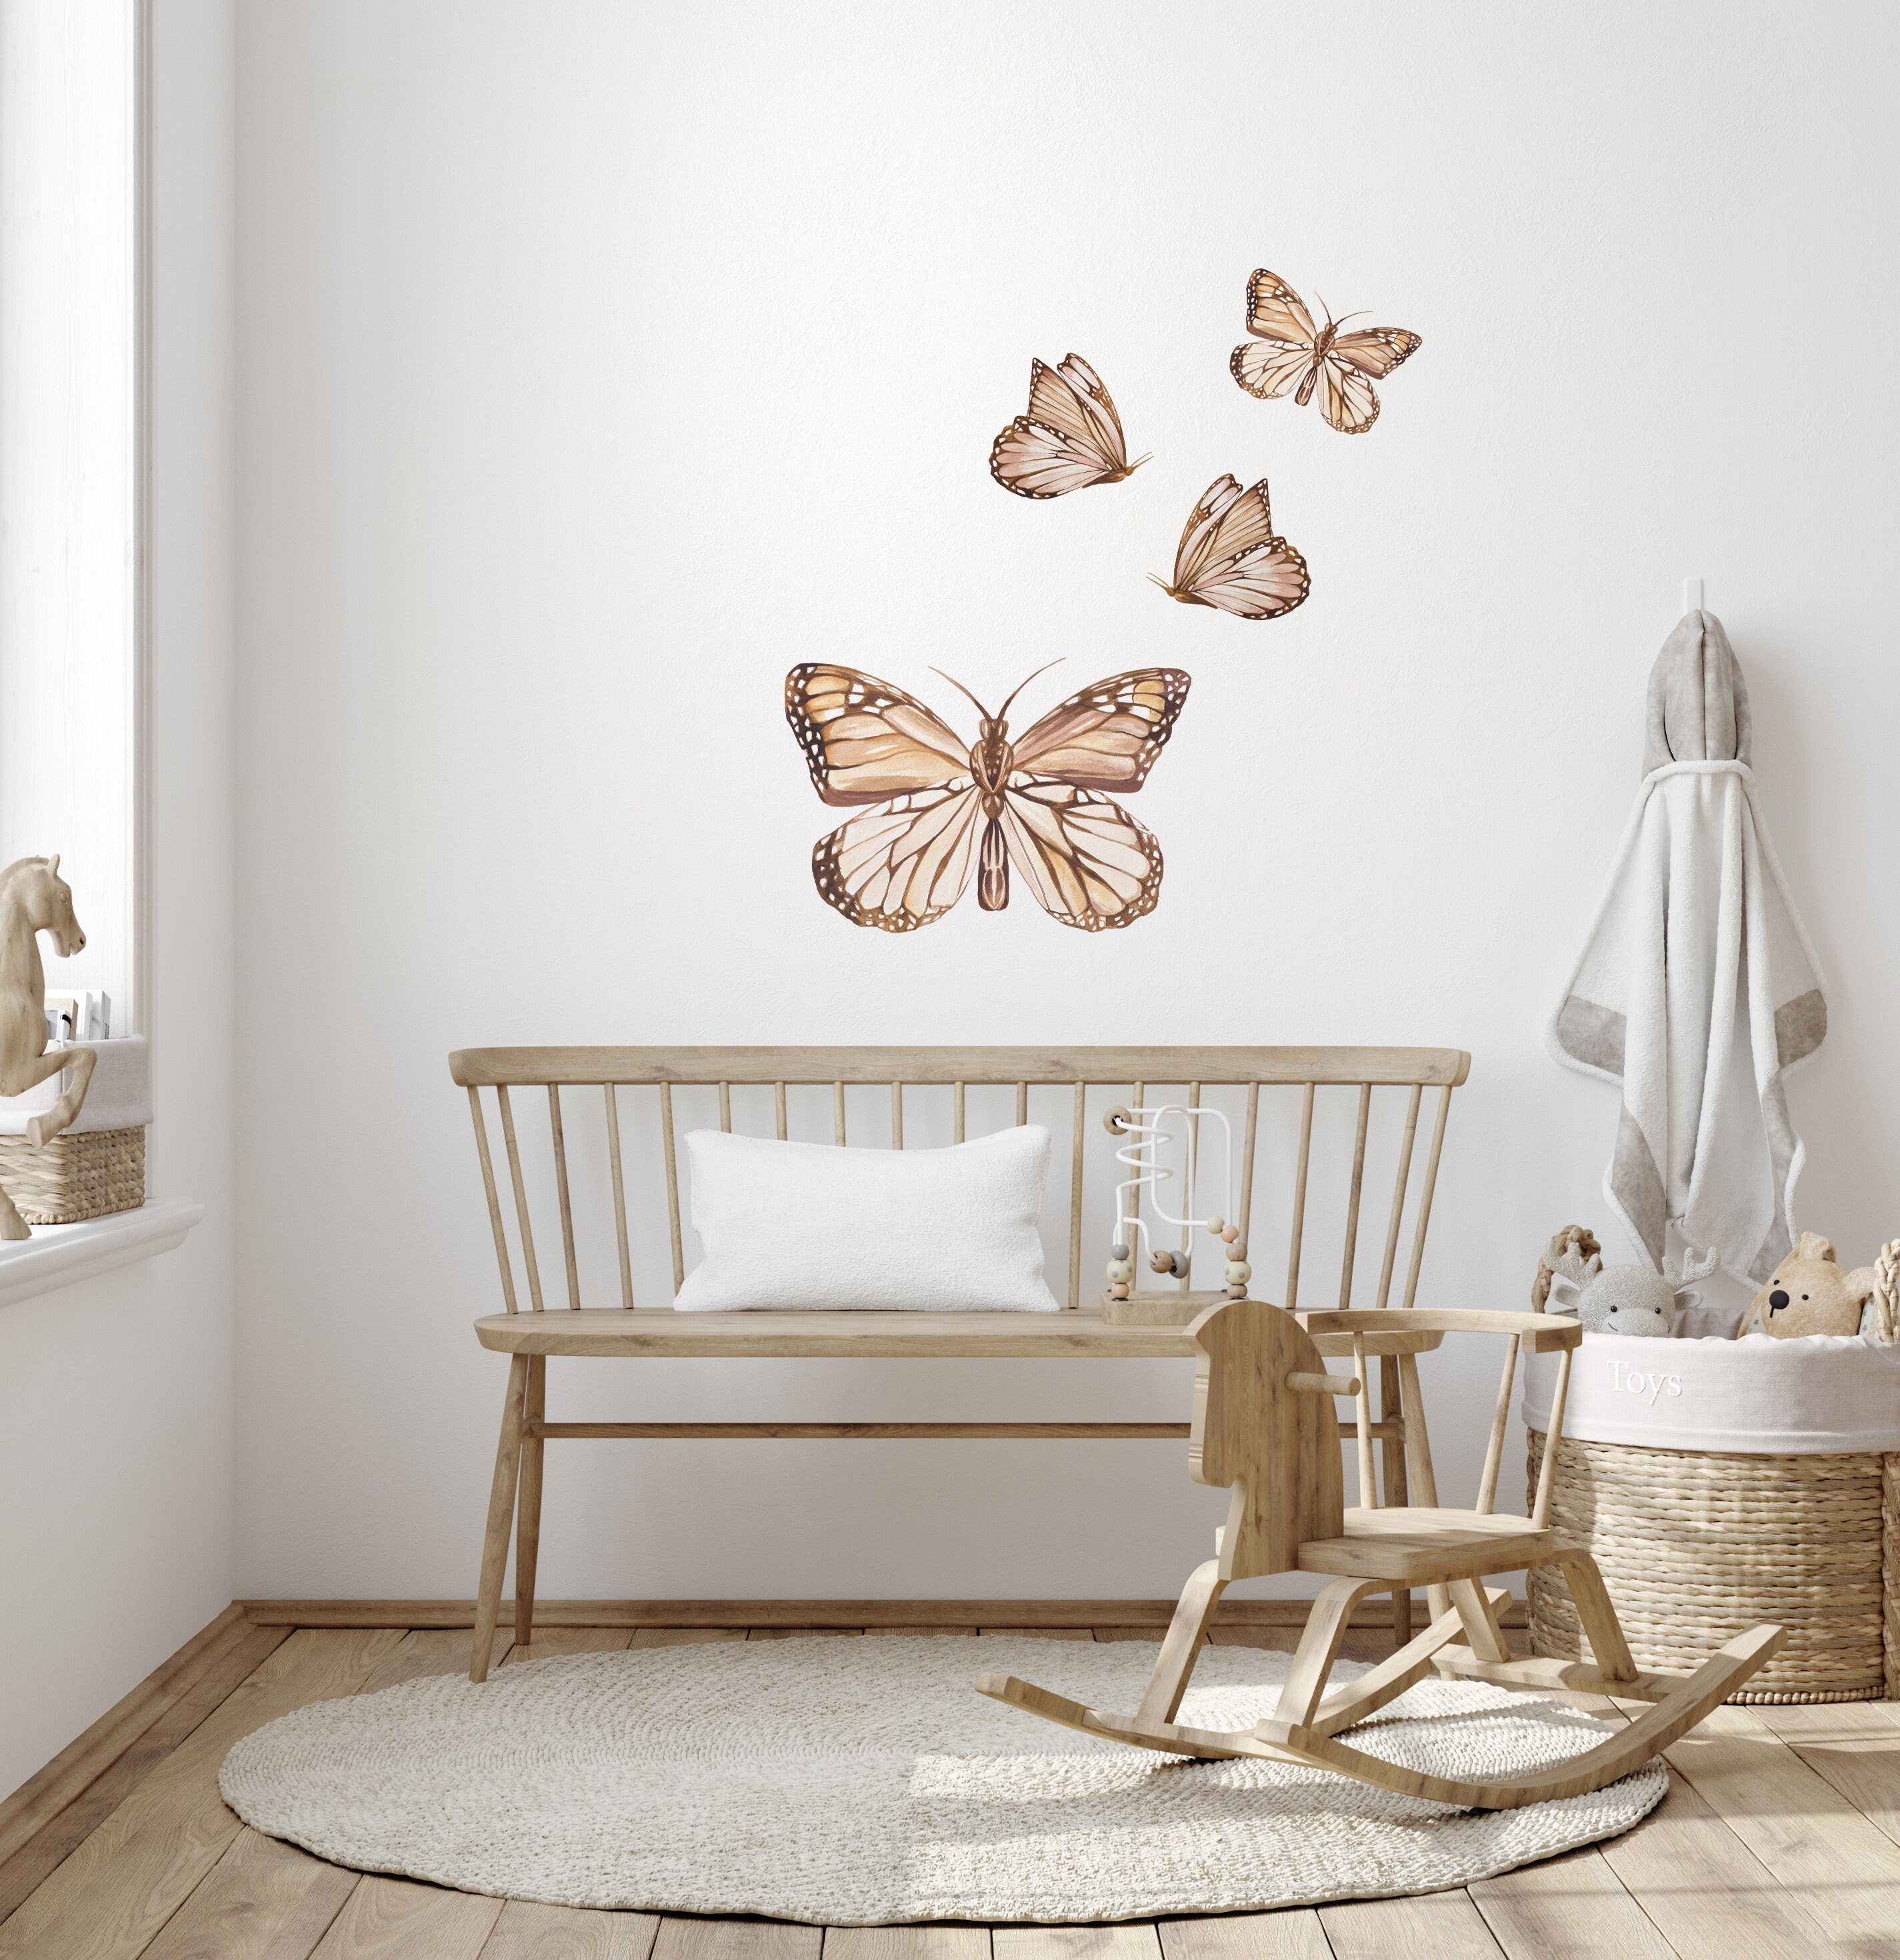 72 Pcs Butterfly Wall Decor Stickers, 6 Styles Gold Butterfly Decorations,  3 Sizes 3D Butterfly Party Decorations/Birthday Decorations/Cake